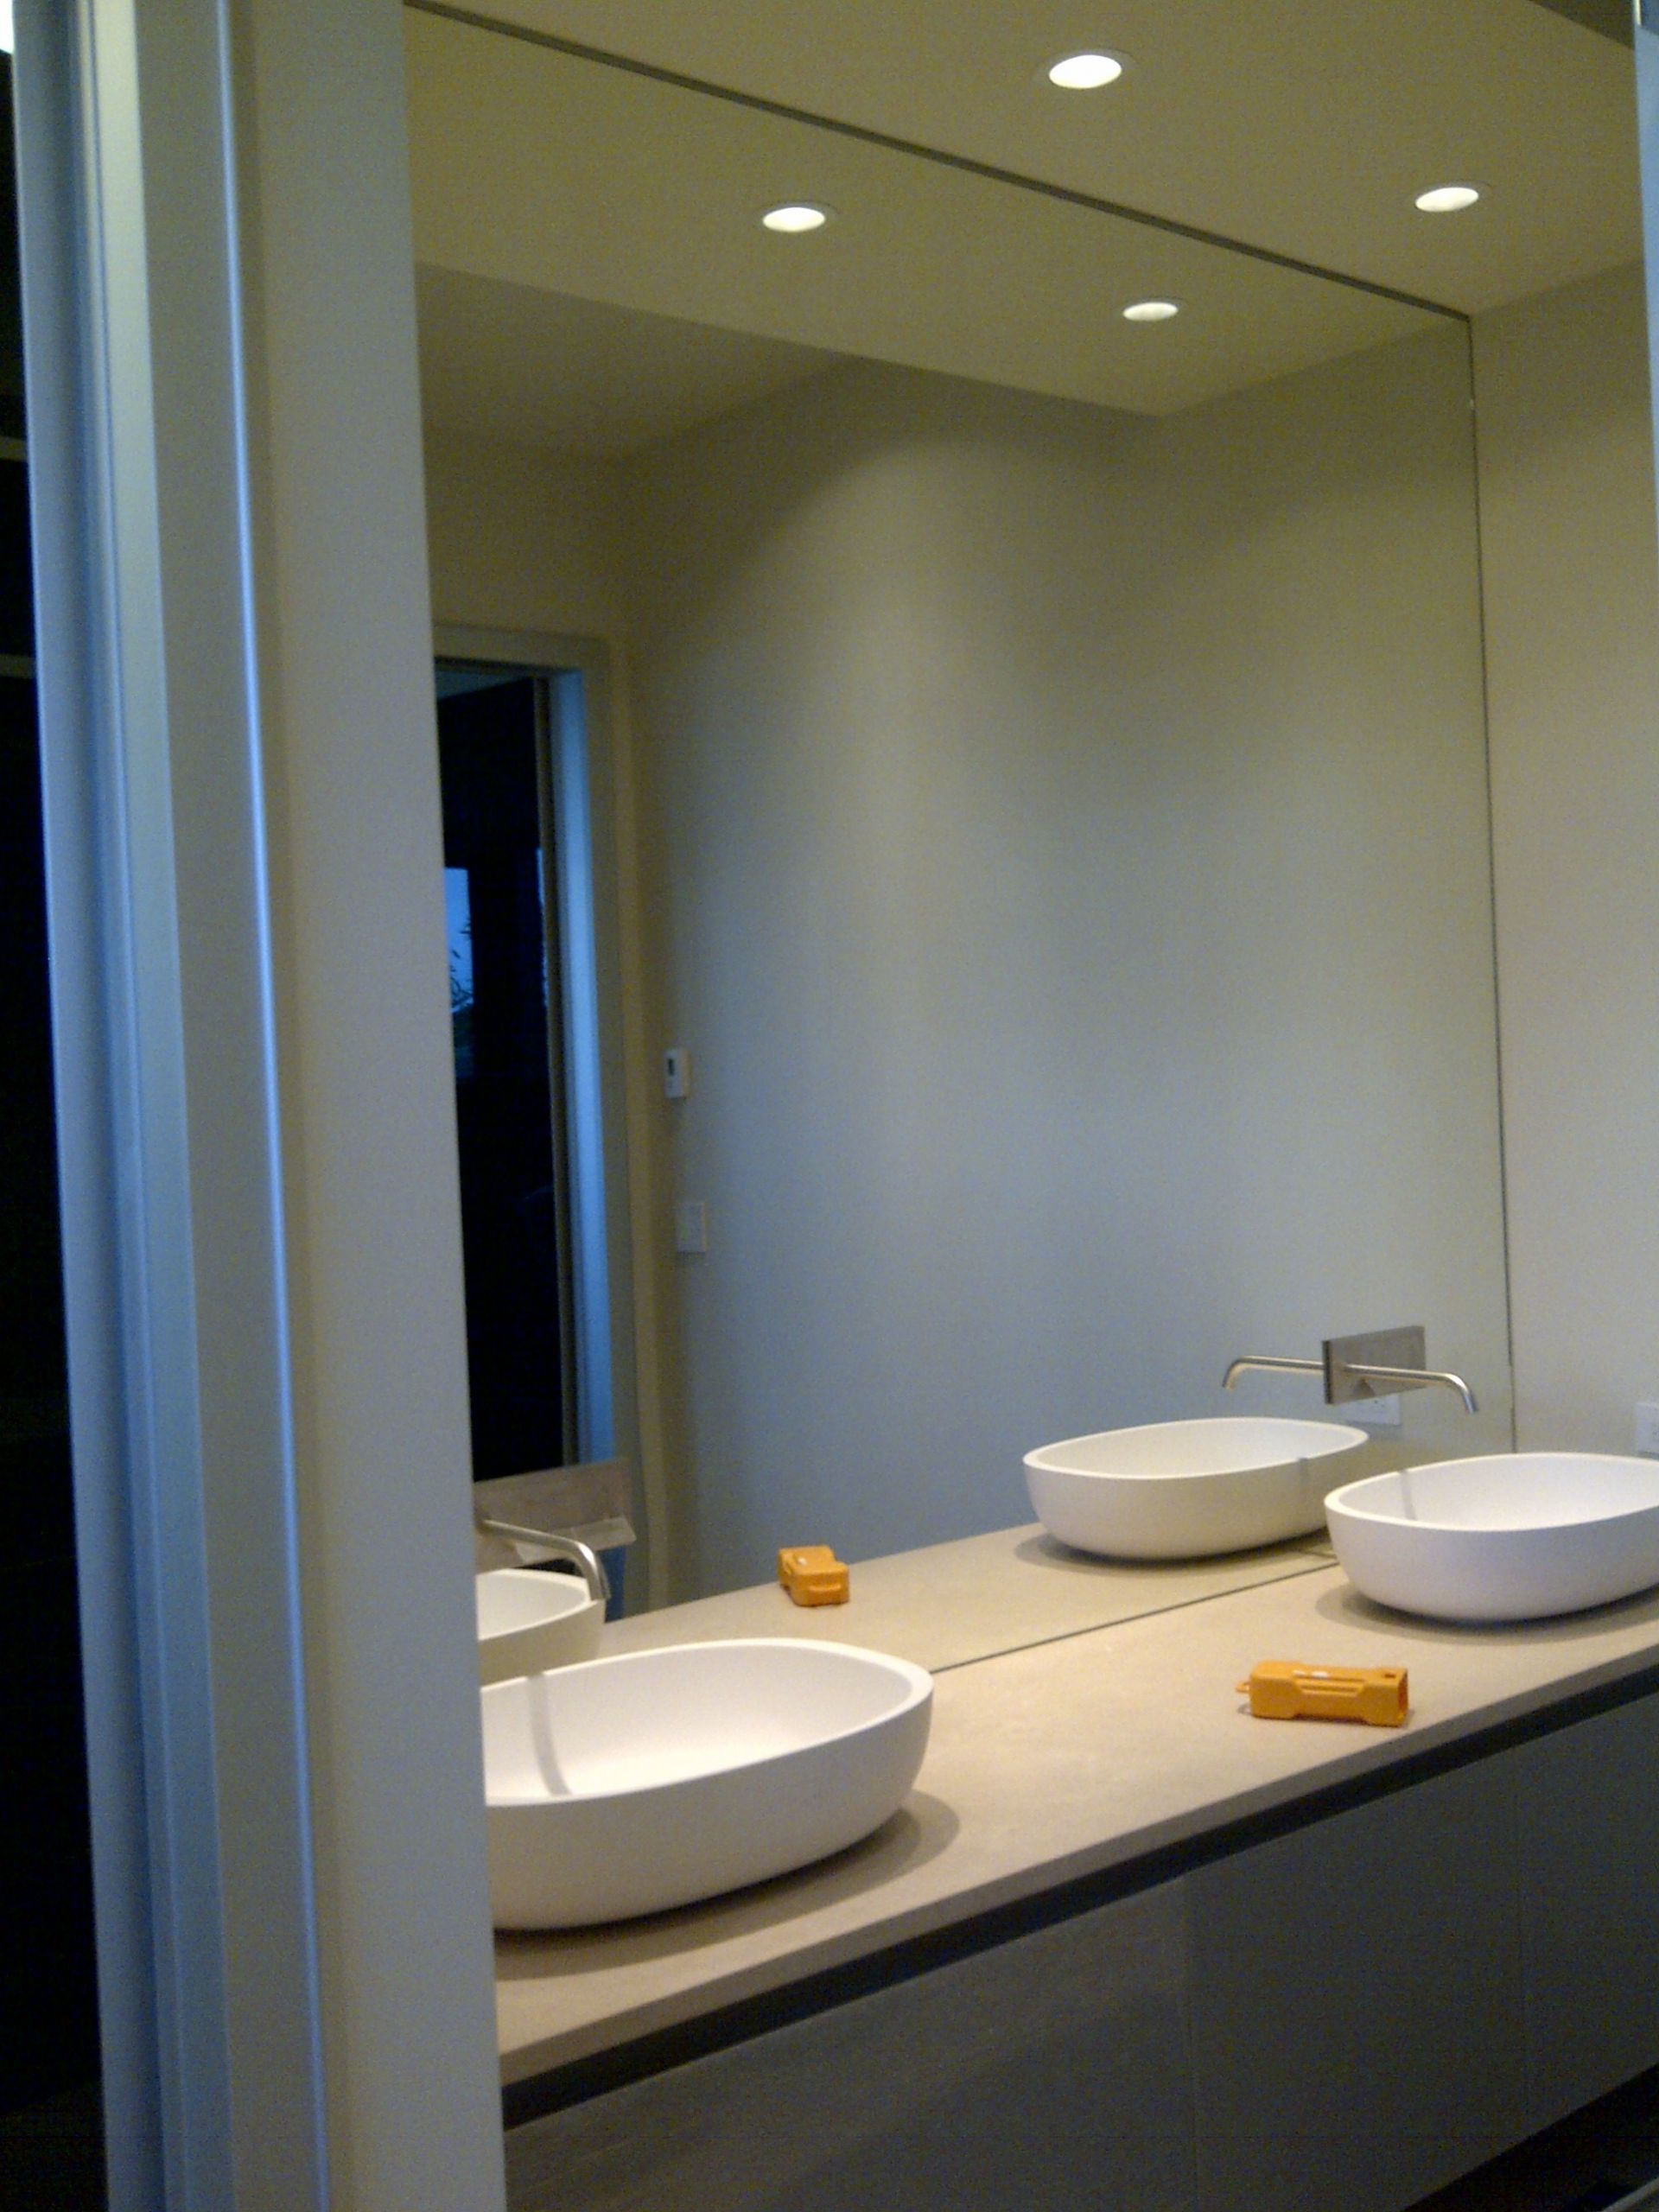 Wall Mirror For Bathroom
 mirrors repair replace and install in Vancouver Bc